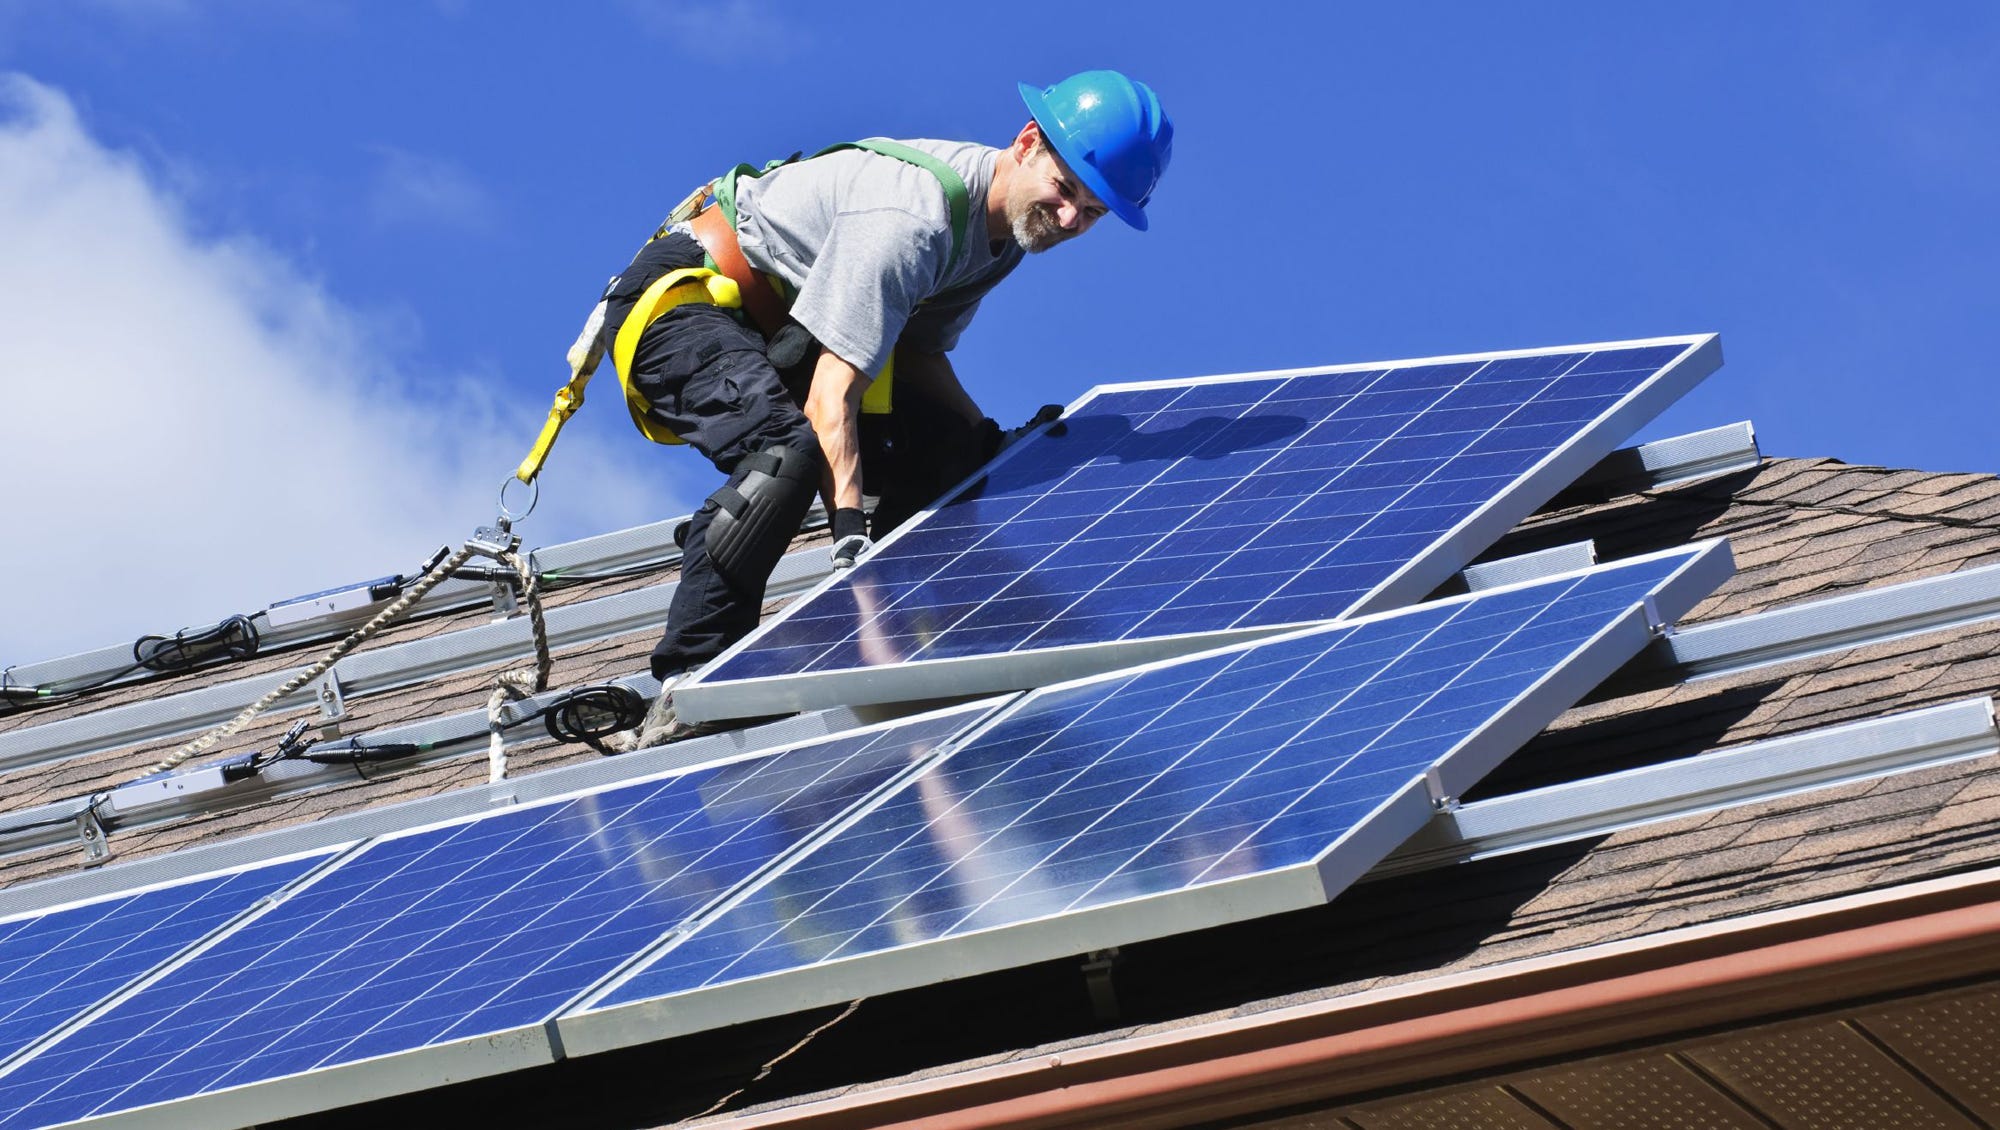 Solar Panel Installation Overview and Expectations to Keep in Mind